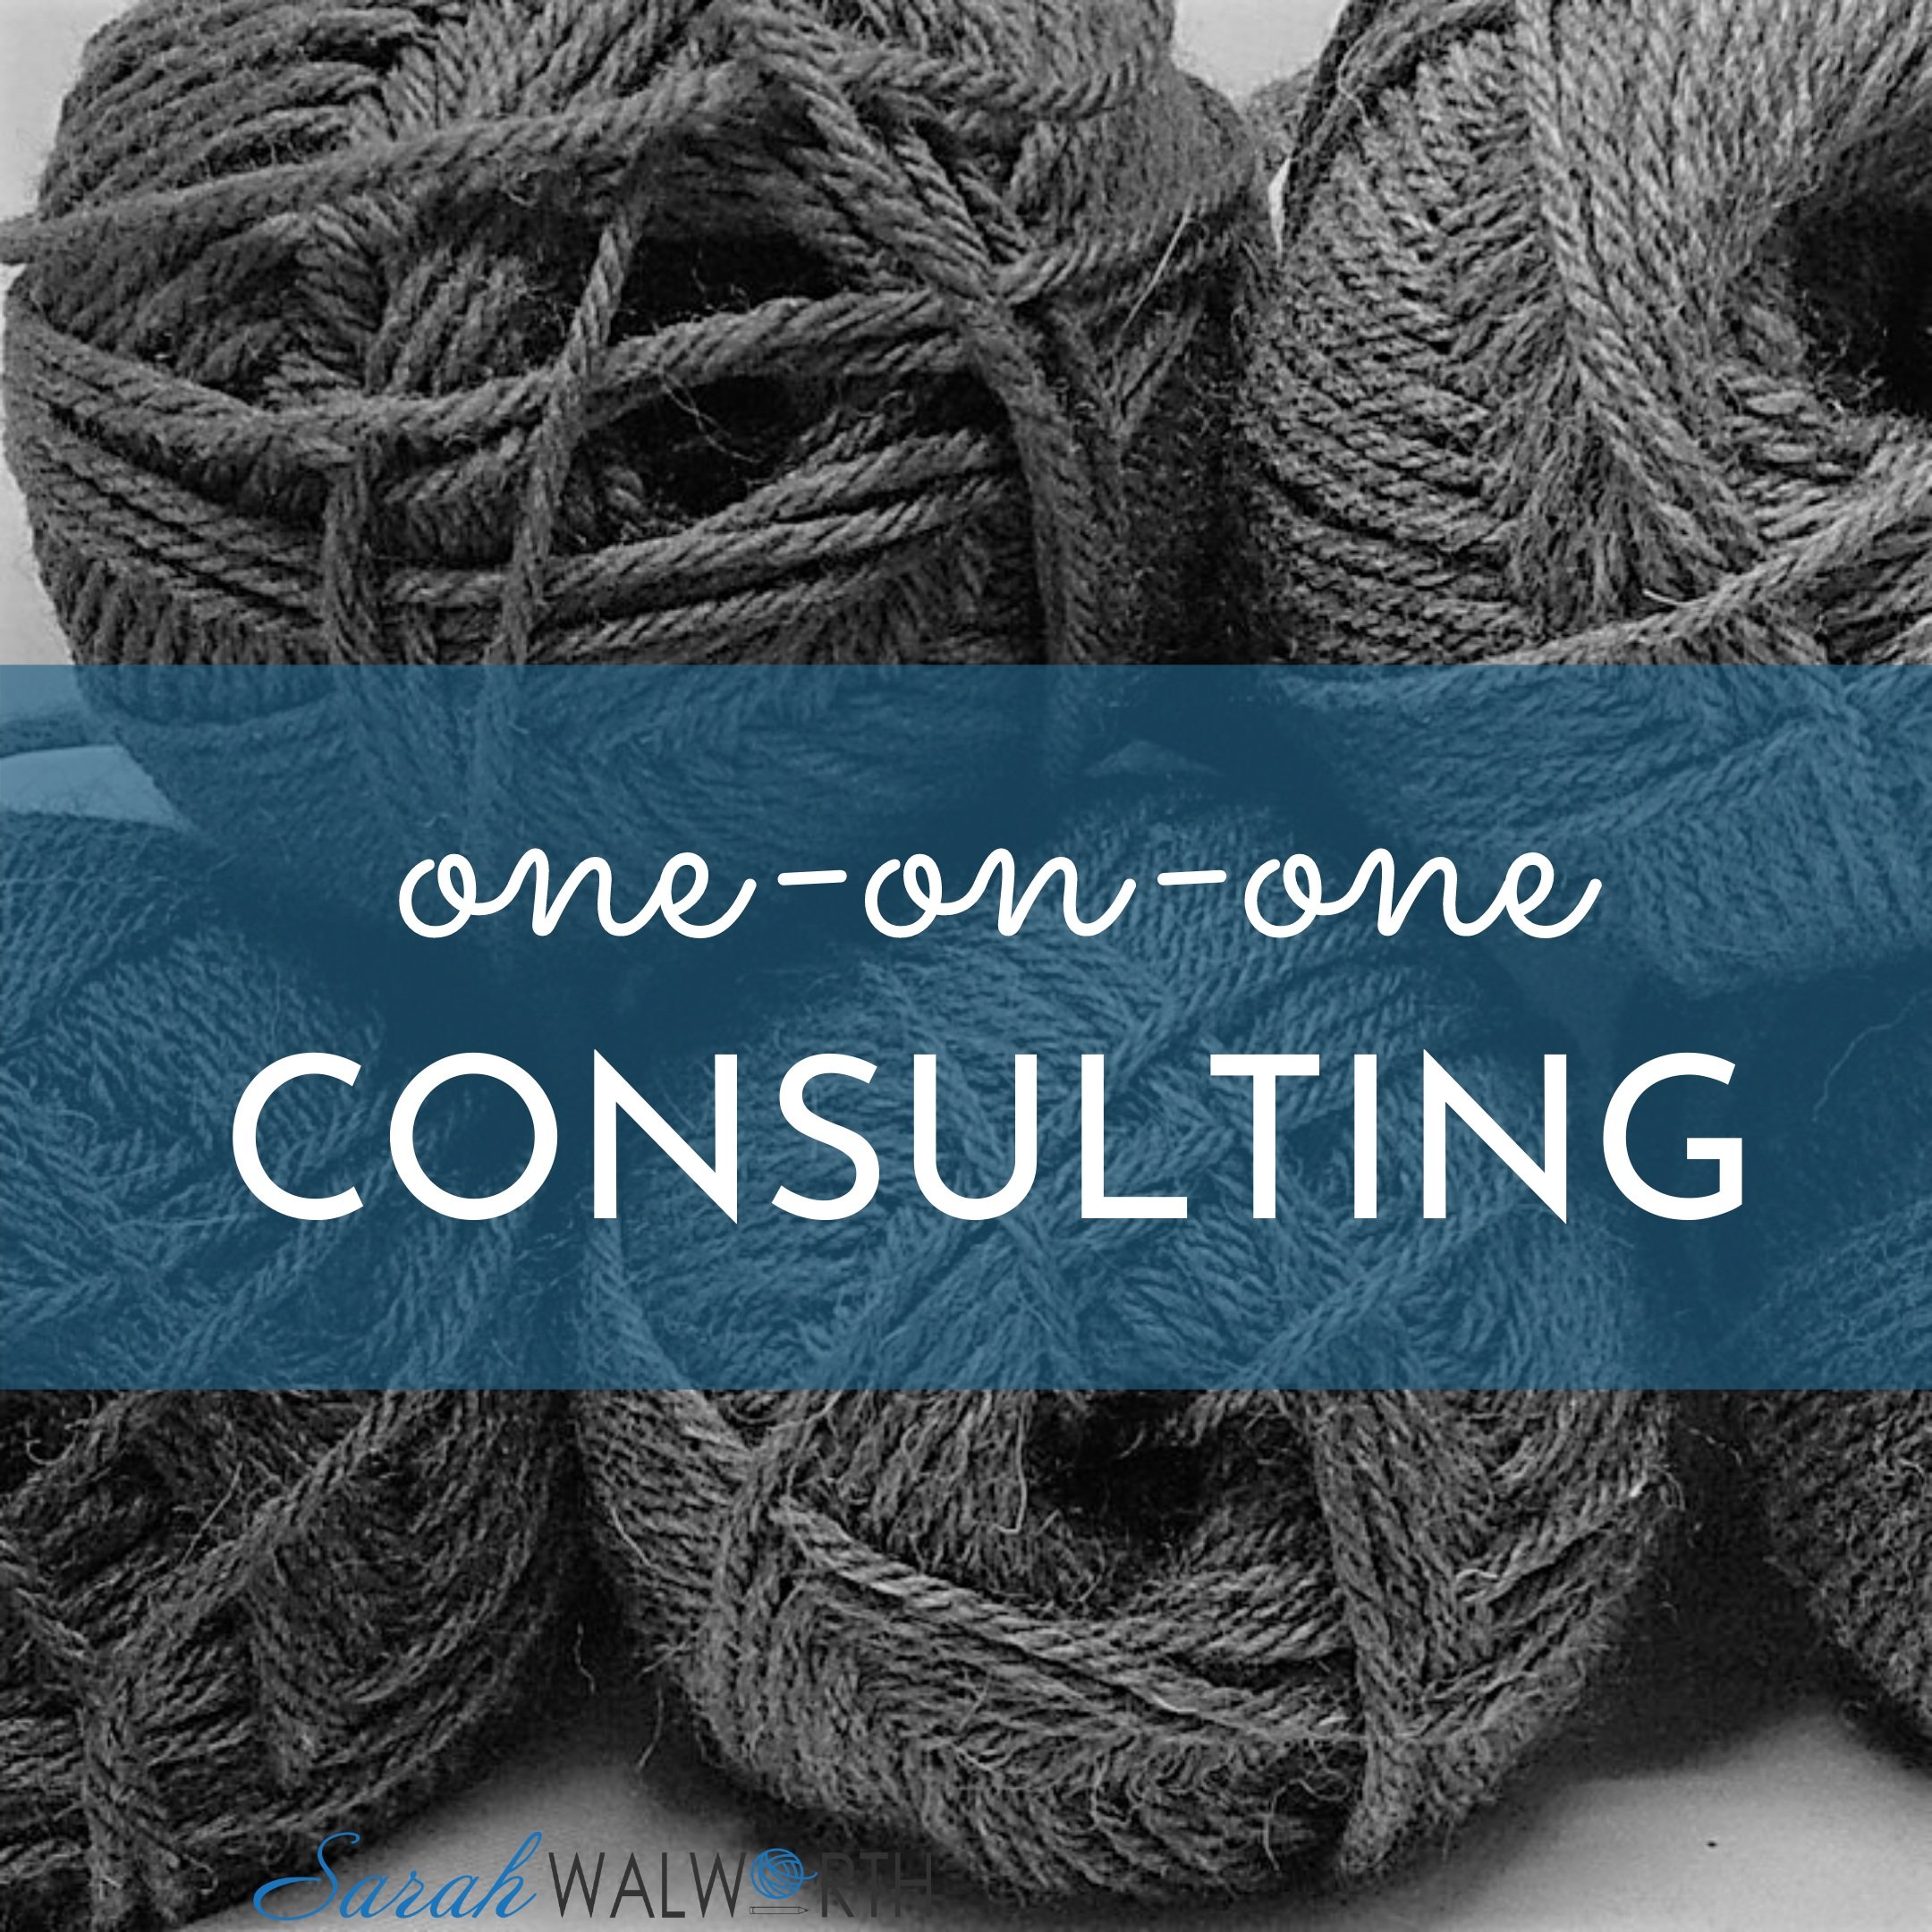 One-on-one consulting